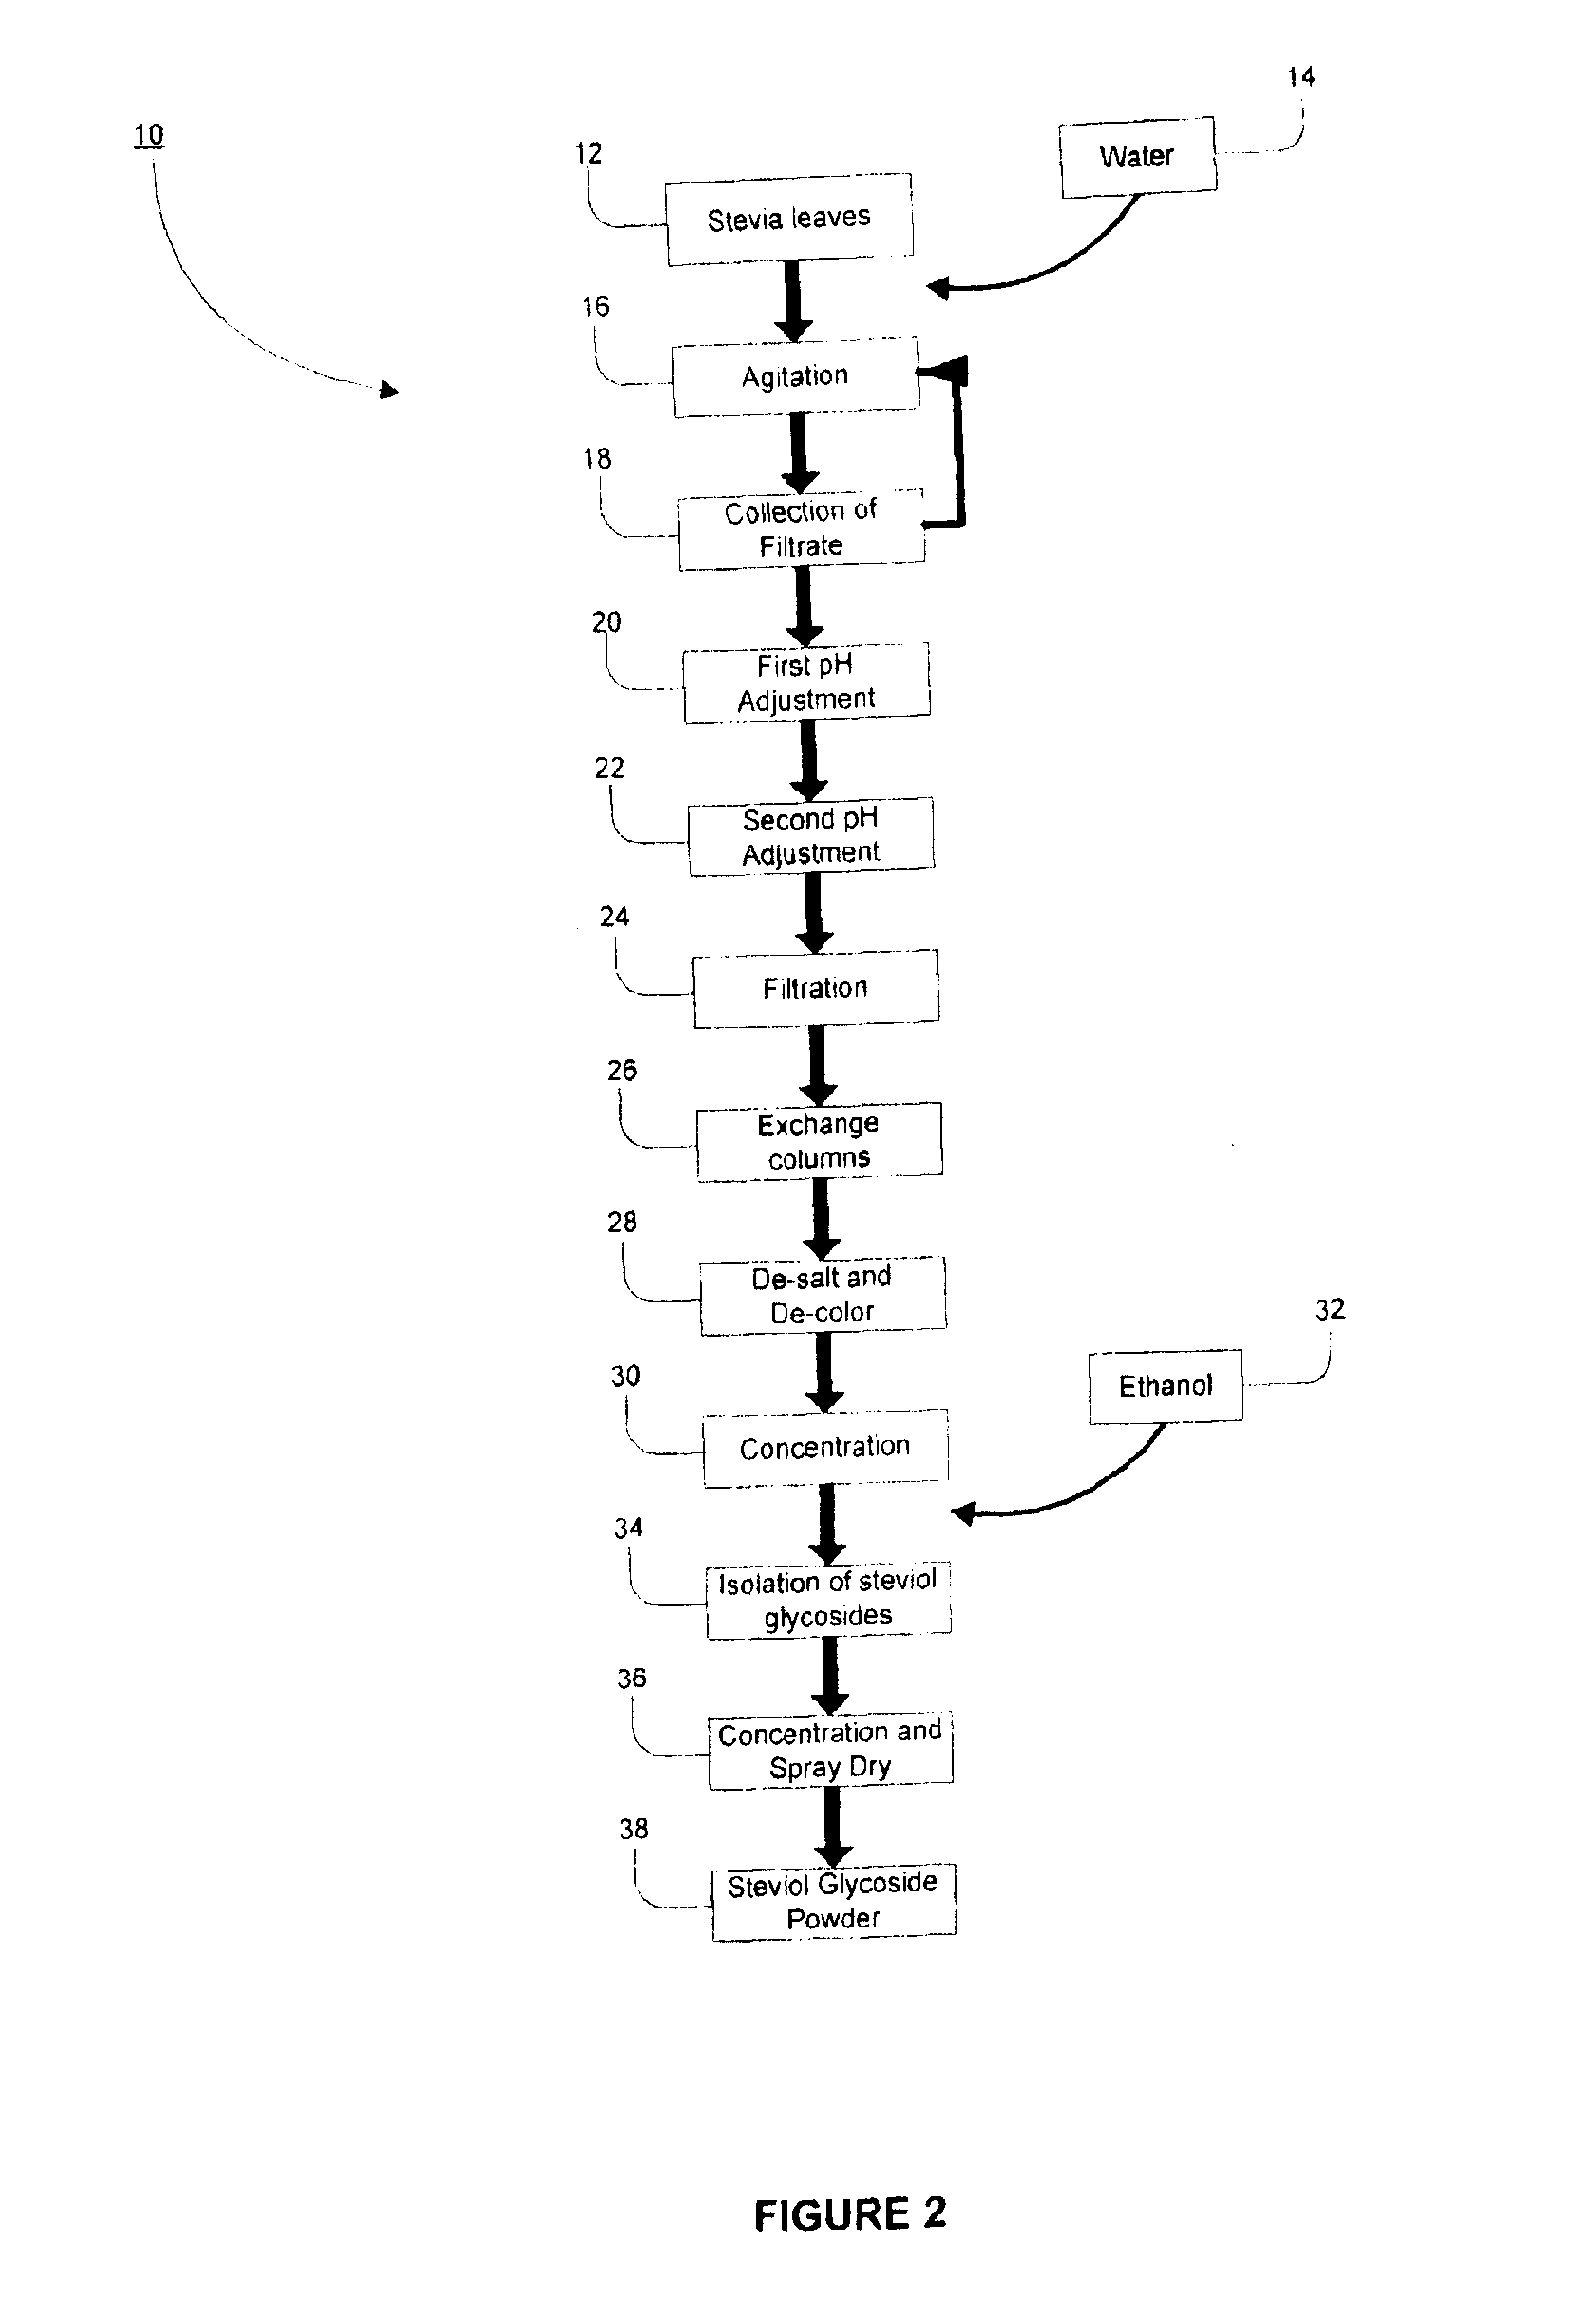 Processes of Purifying Steviol Glycosides